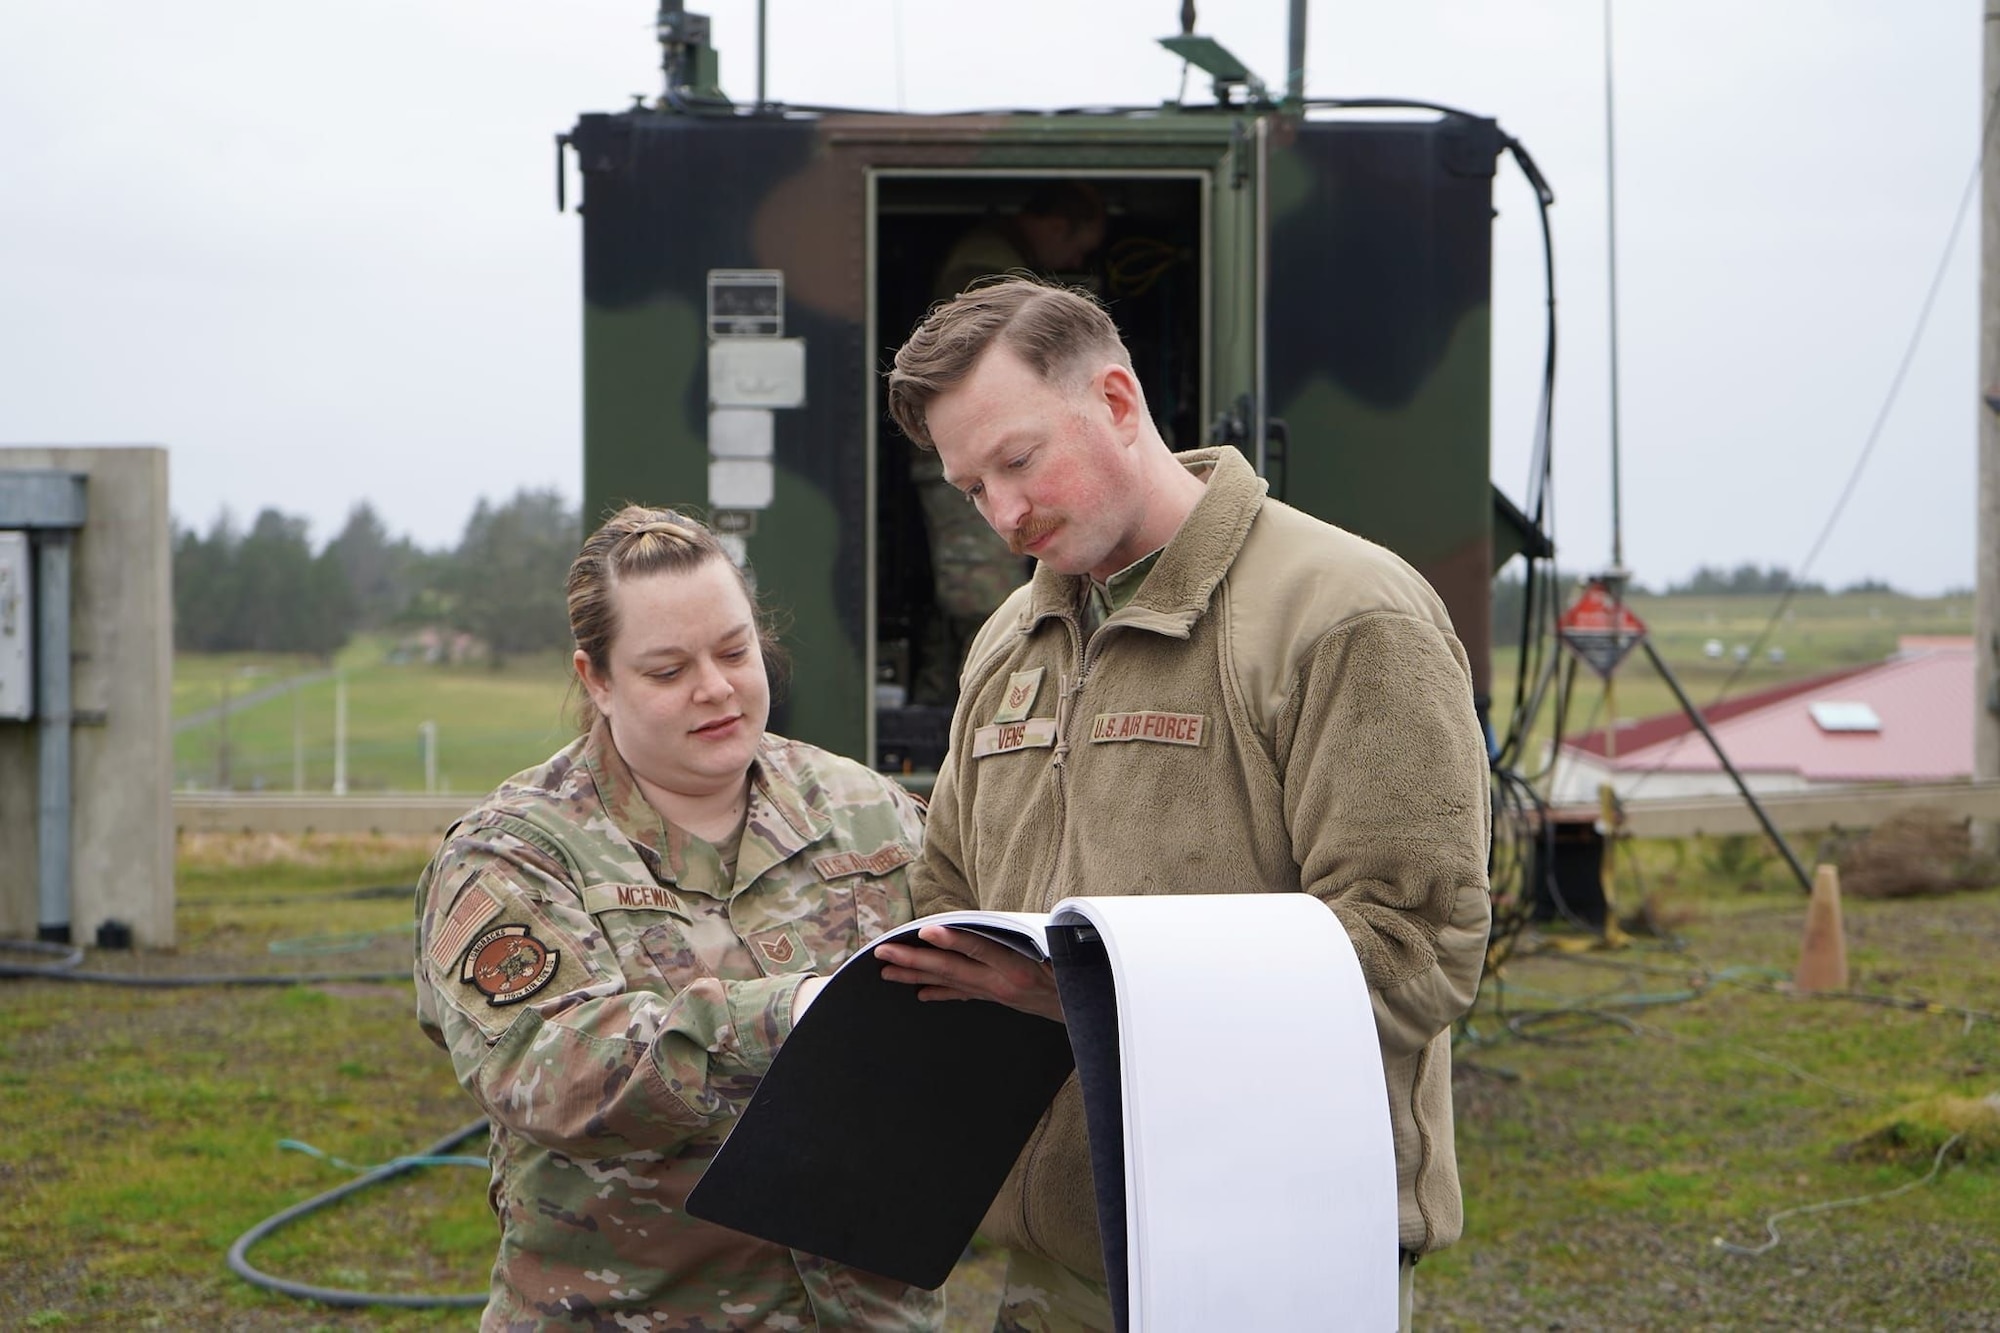 Tech. Sgt. Stacie McEwan (left) of the 116th Air Control Squadron reviews wiring diagrams with Tech. Sgt. Robert Vens of the 225th Support Squadron at Camp Rilea in Warrenton, Oregon this February. During this training, the 116th ACS demonstrated their ability to integrate the control and reporting center into the homeland defense design to the 225th and the Western Air Defense Sector.